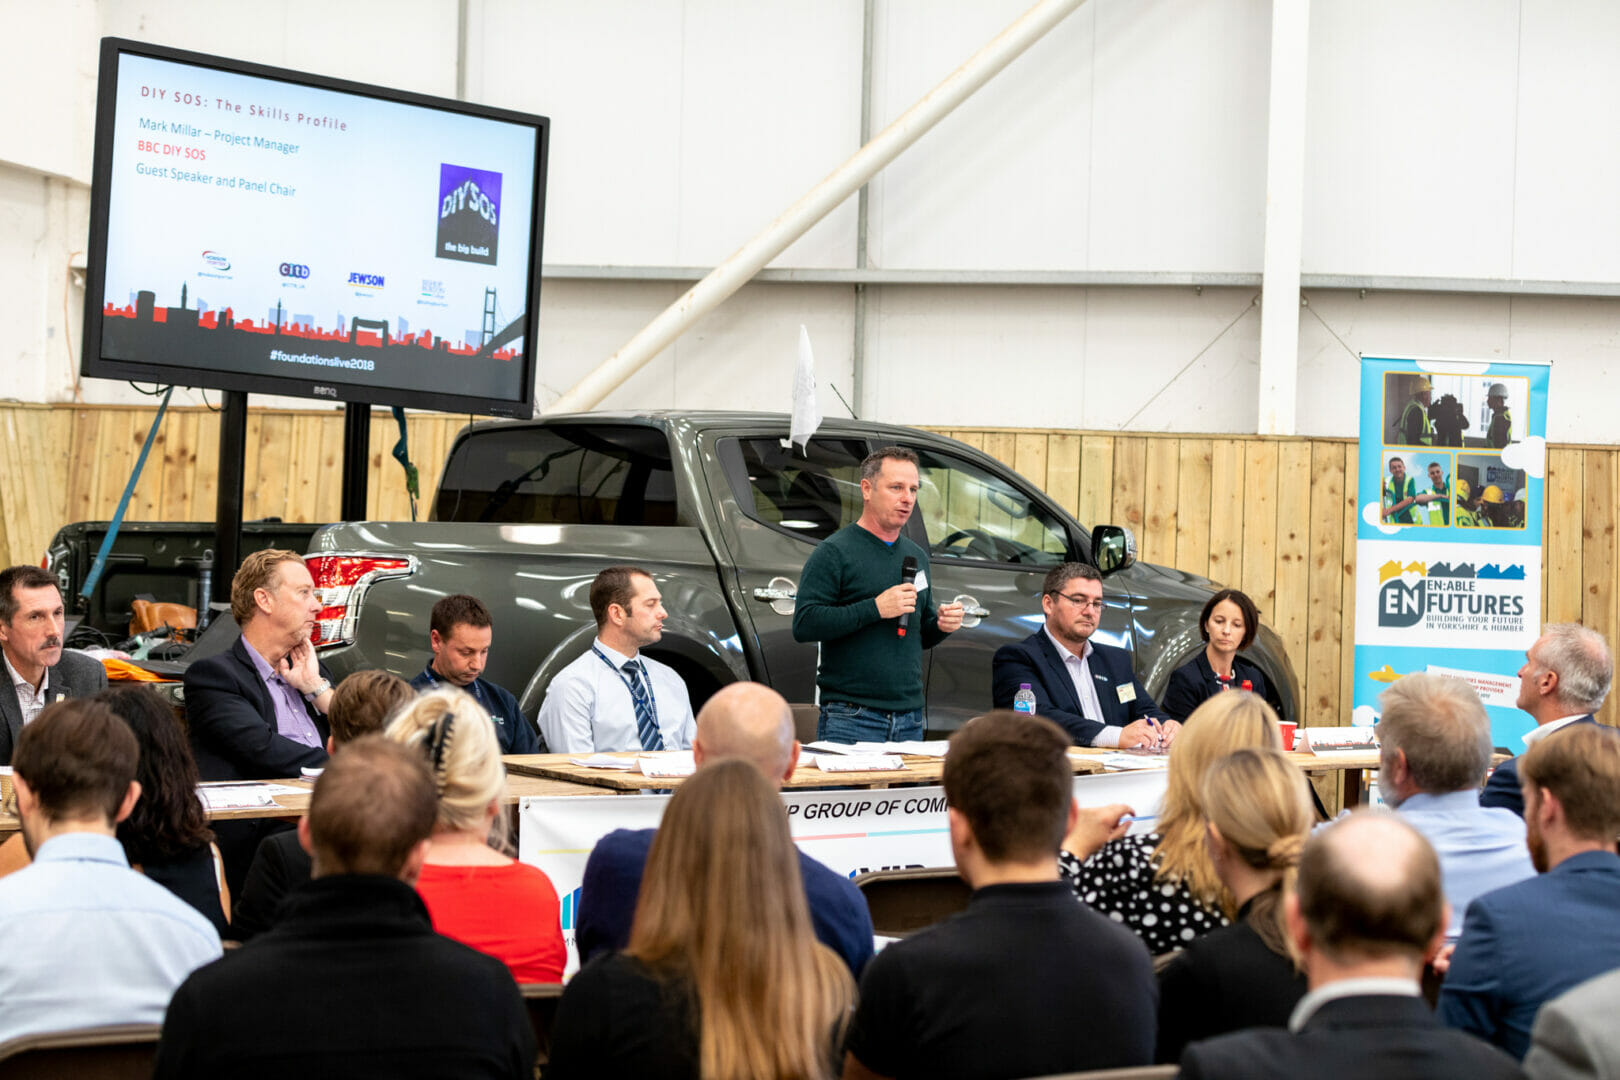 Answering the skills SOS: BBC One’s Mark Millar leads industry debate at construction event